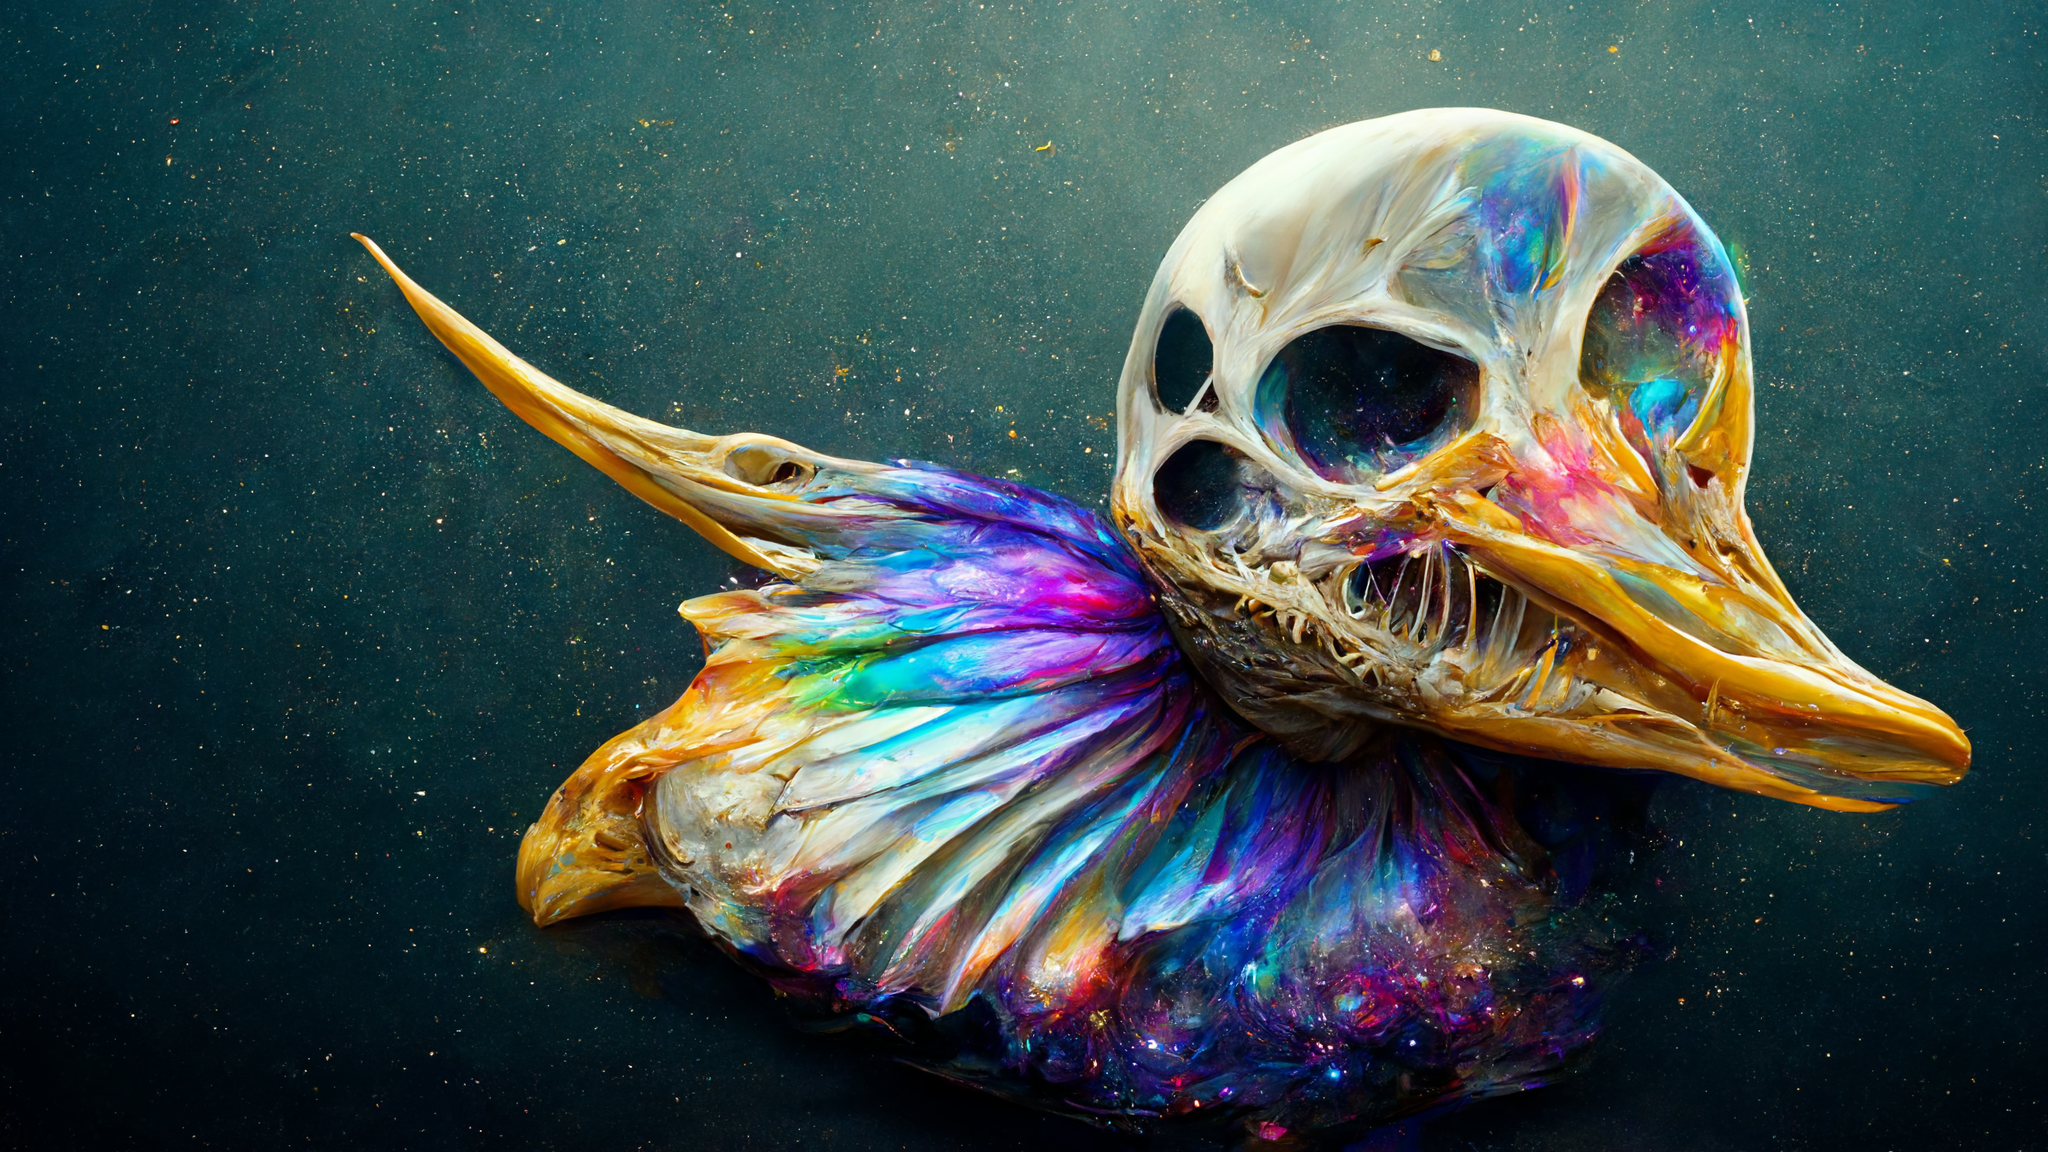 Dusjagr duckhead in the seashell with many wings crazy skeleton 48967b53-c3a0-4ce8-82cb-e1a16d365b68.png